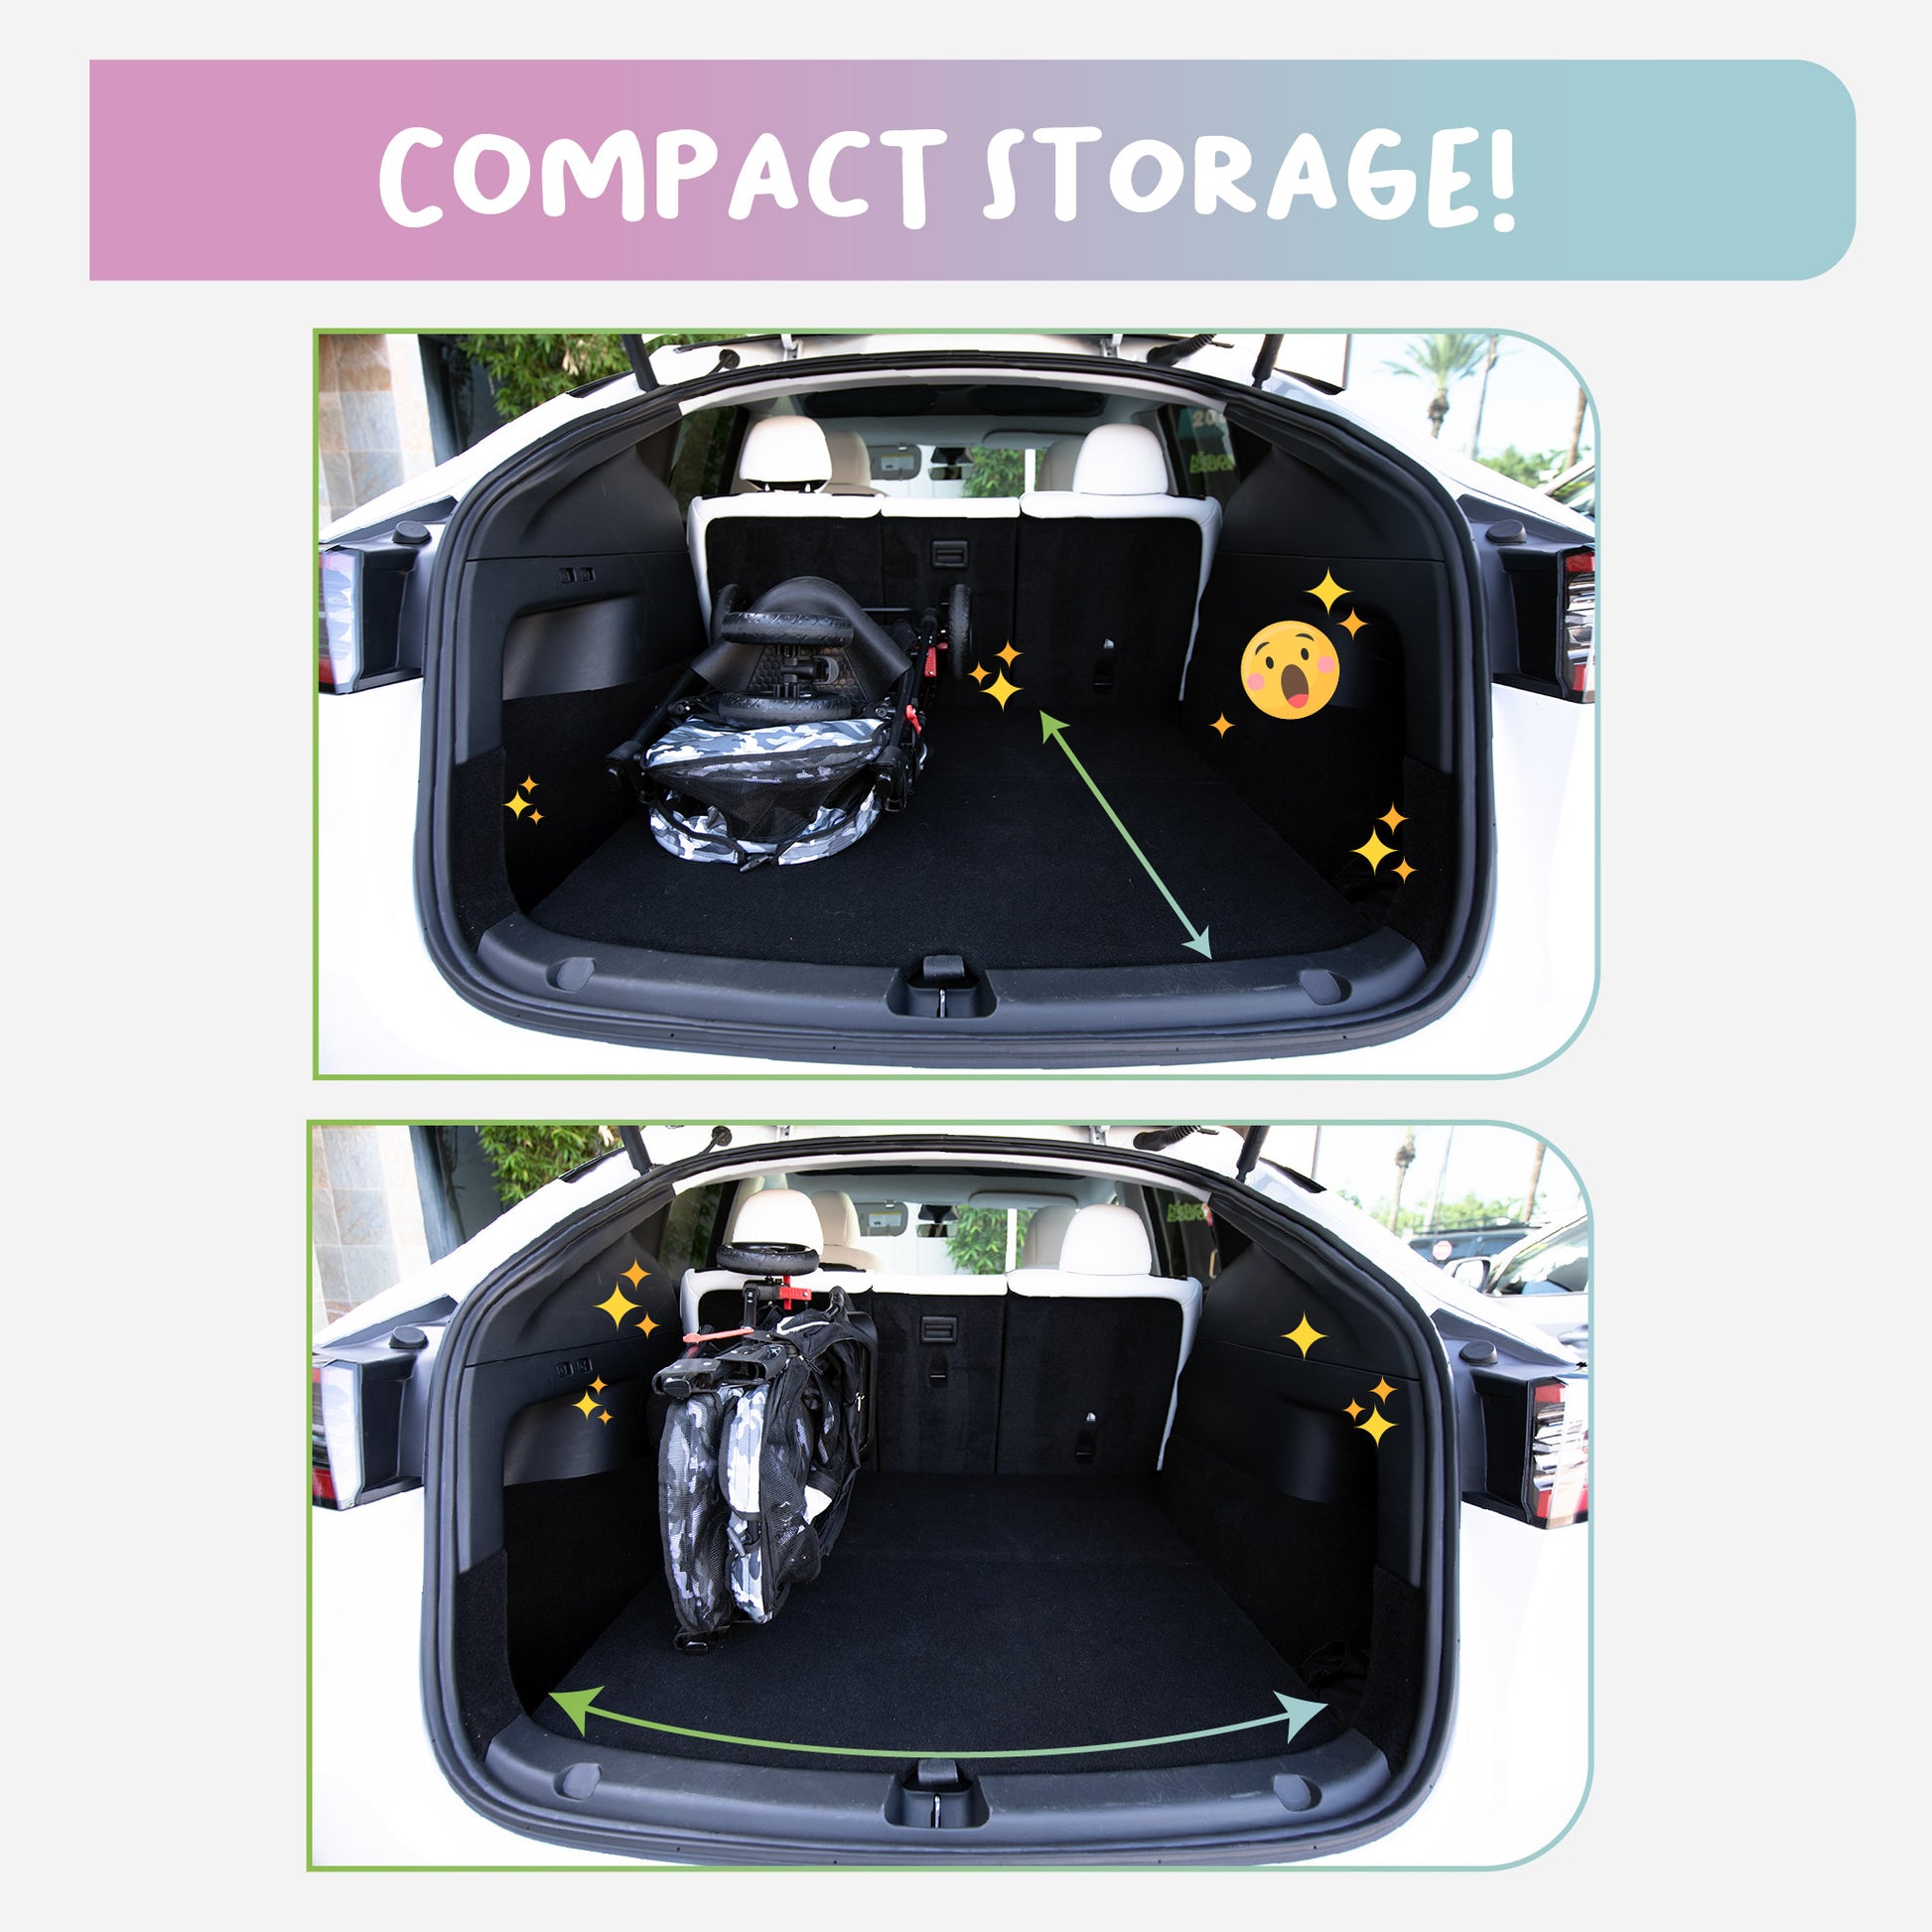 compact storage for durable pet stroller